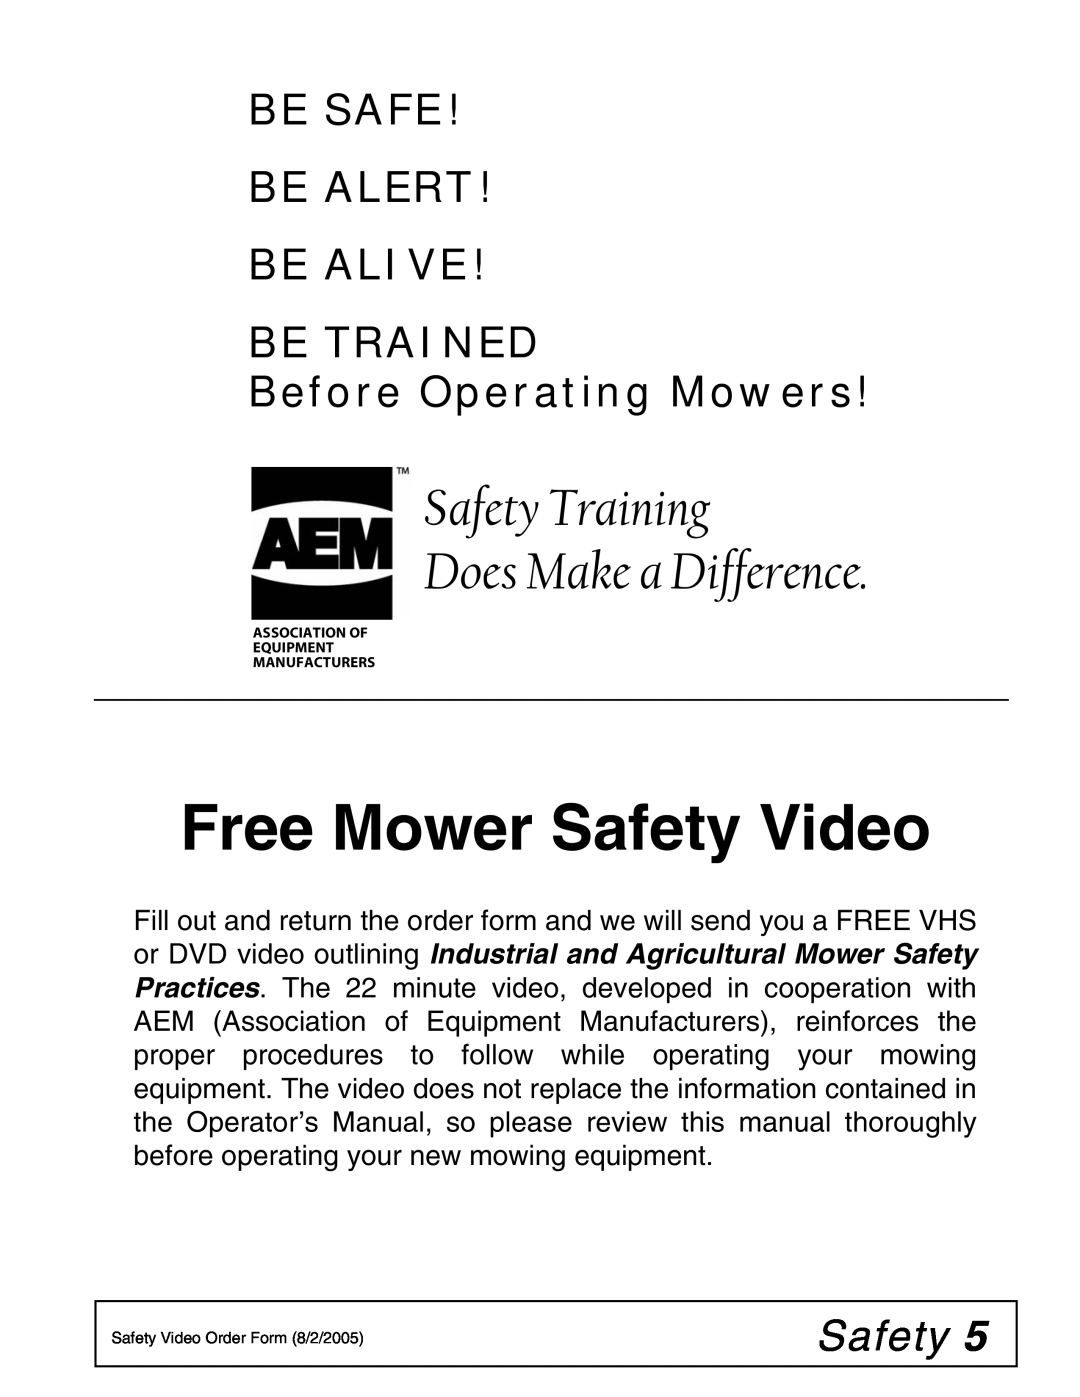 Woods Equipment HC48 Free Mower Safety Video, Safety Training Does Make a Difference, Be Safe Be Alert Be Alive Be Trained 